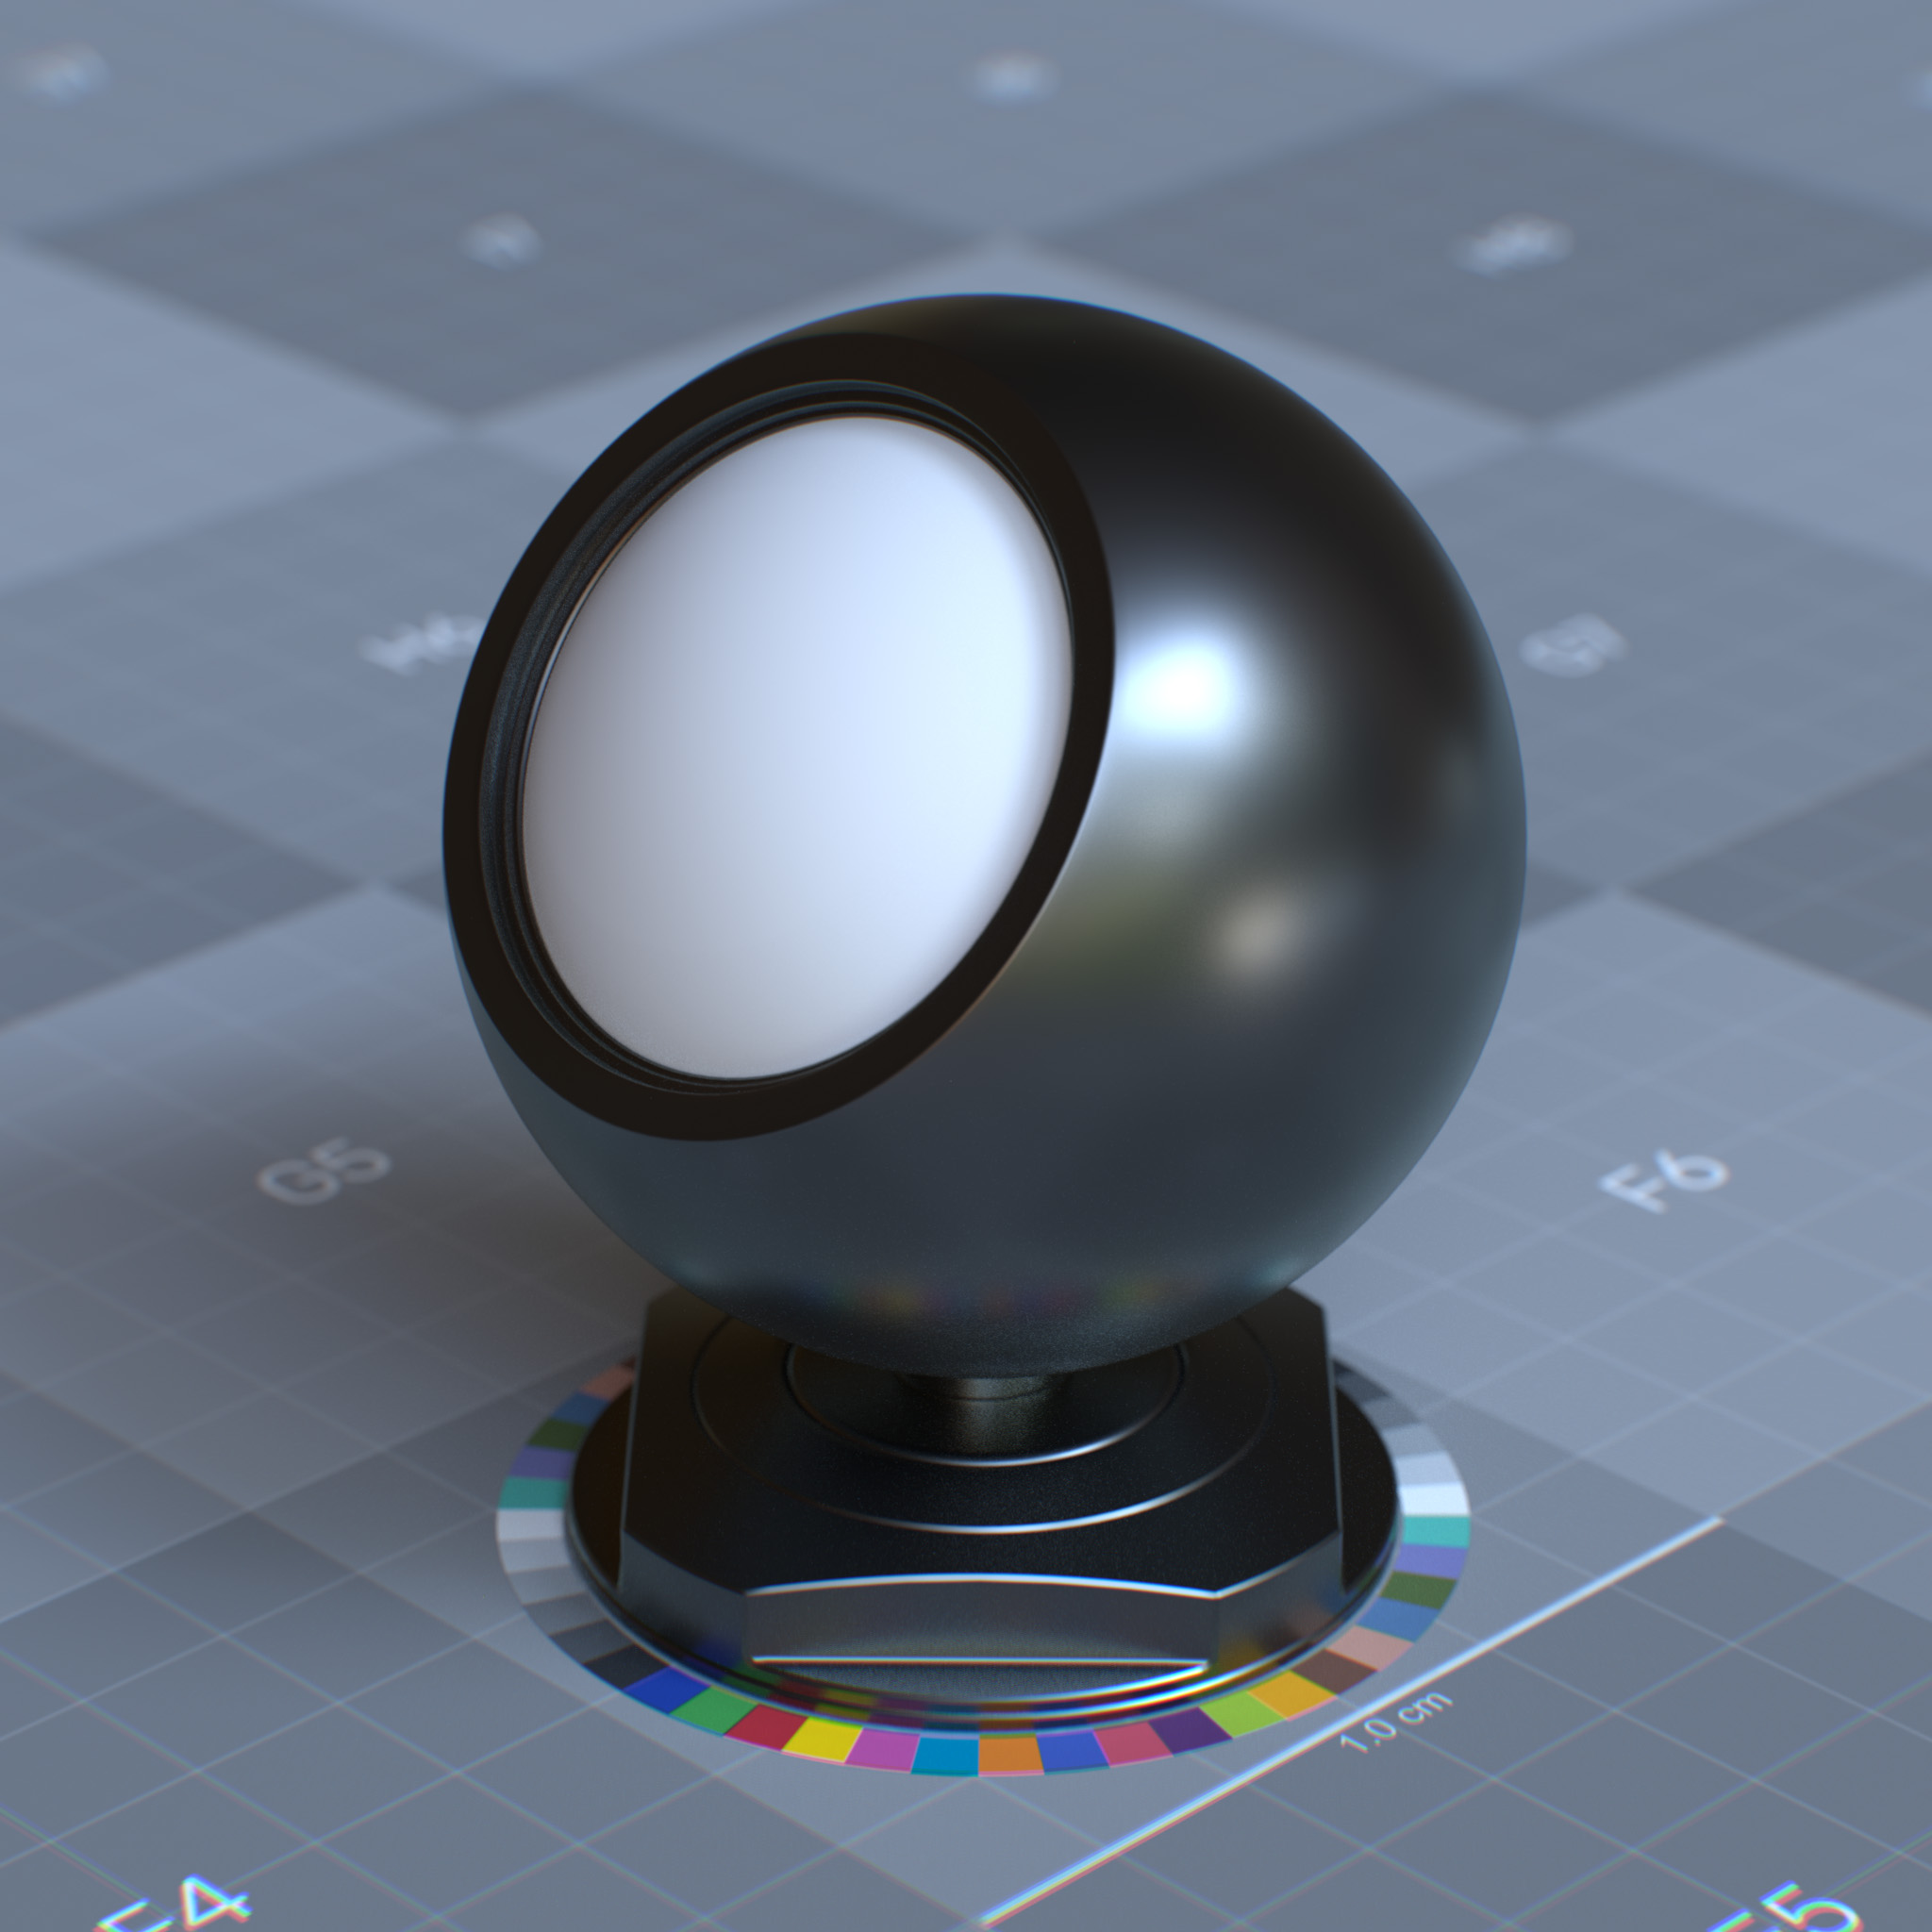 rtx_material_omnisurfacebase_specular_reflection_weight_0p5_metalness_edge_tint